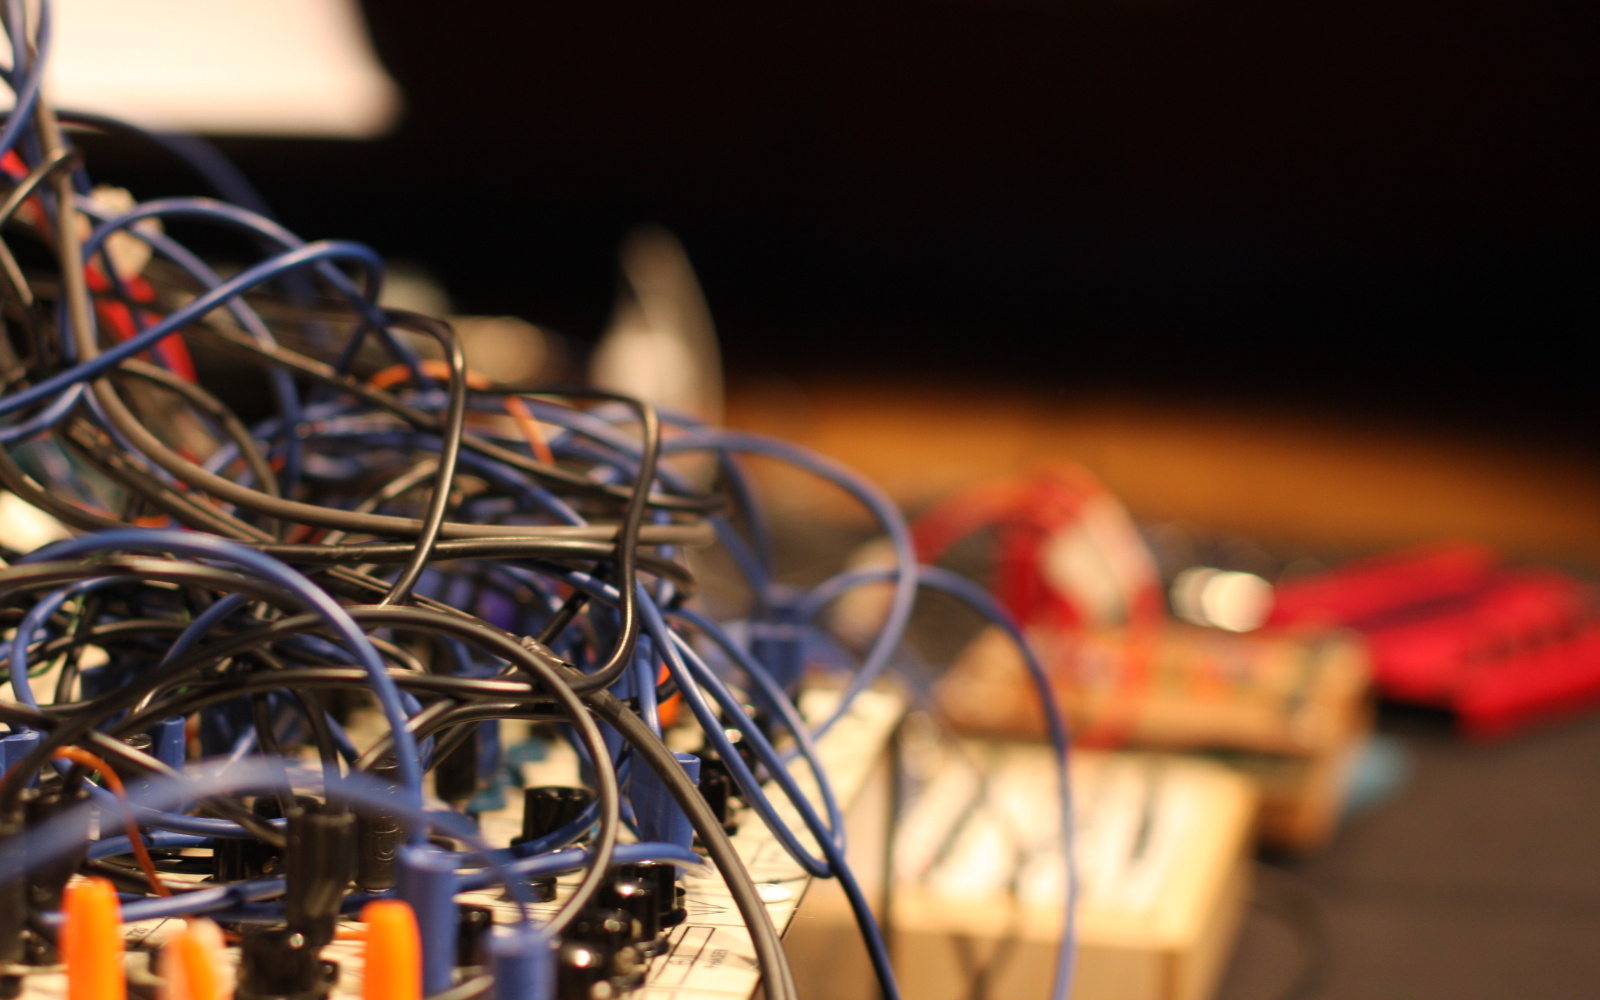 Modularsynthesizer with red and blue wires.